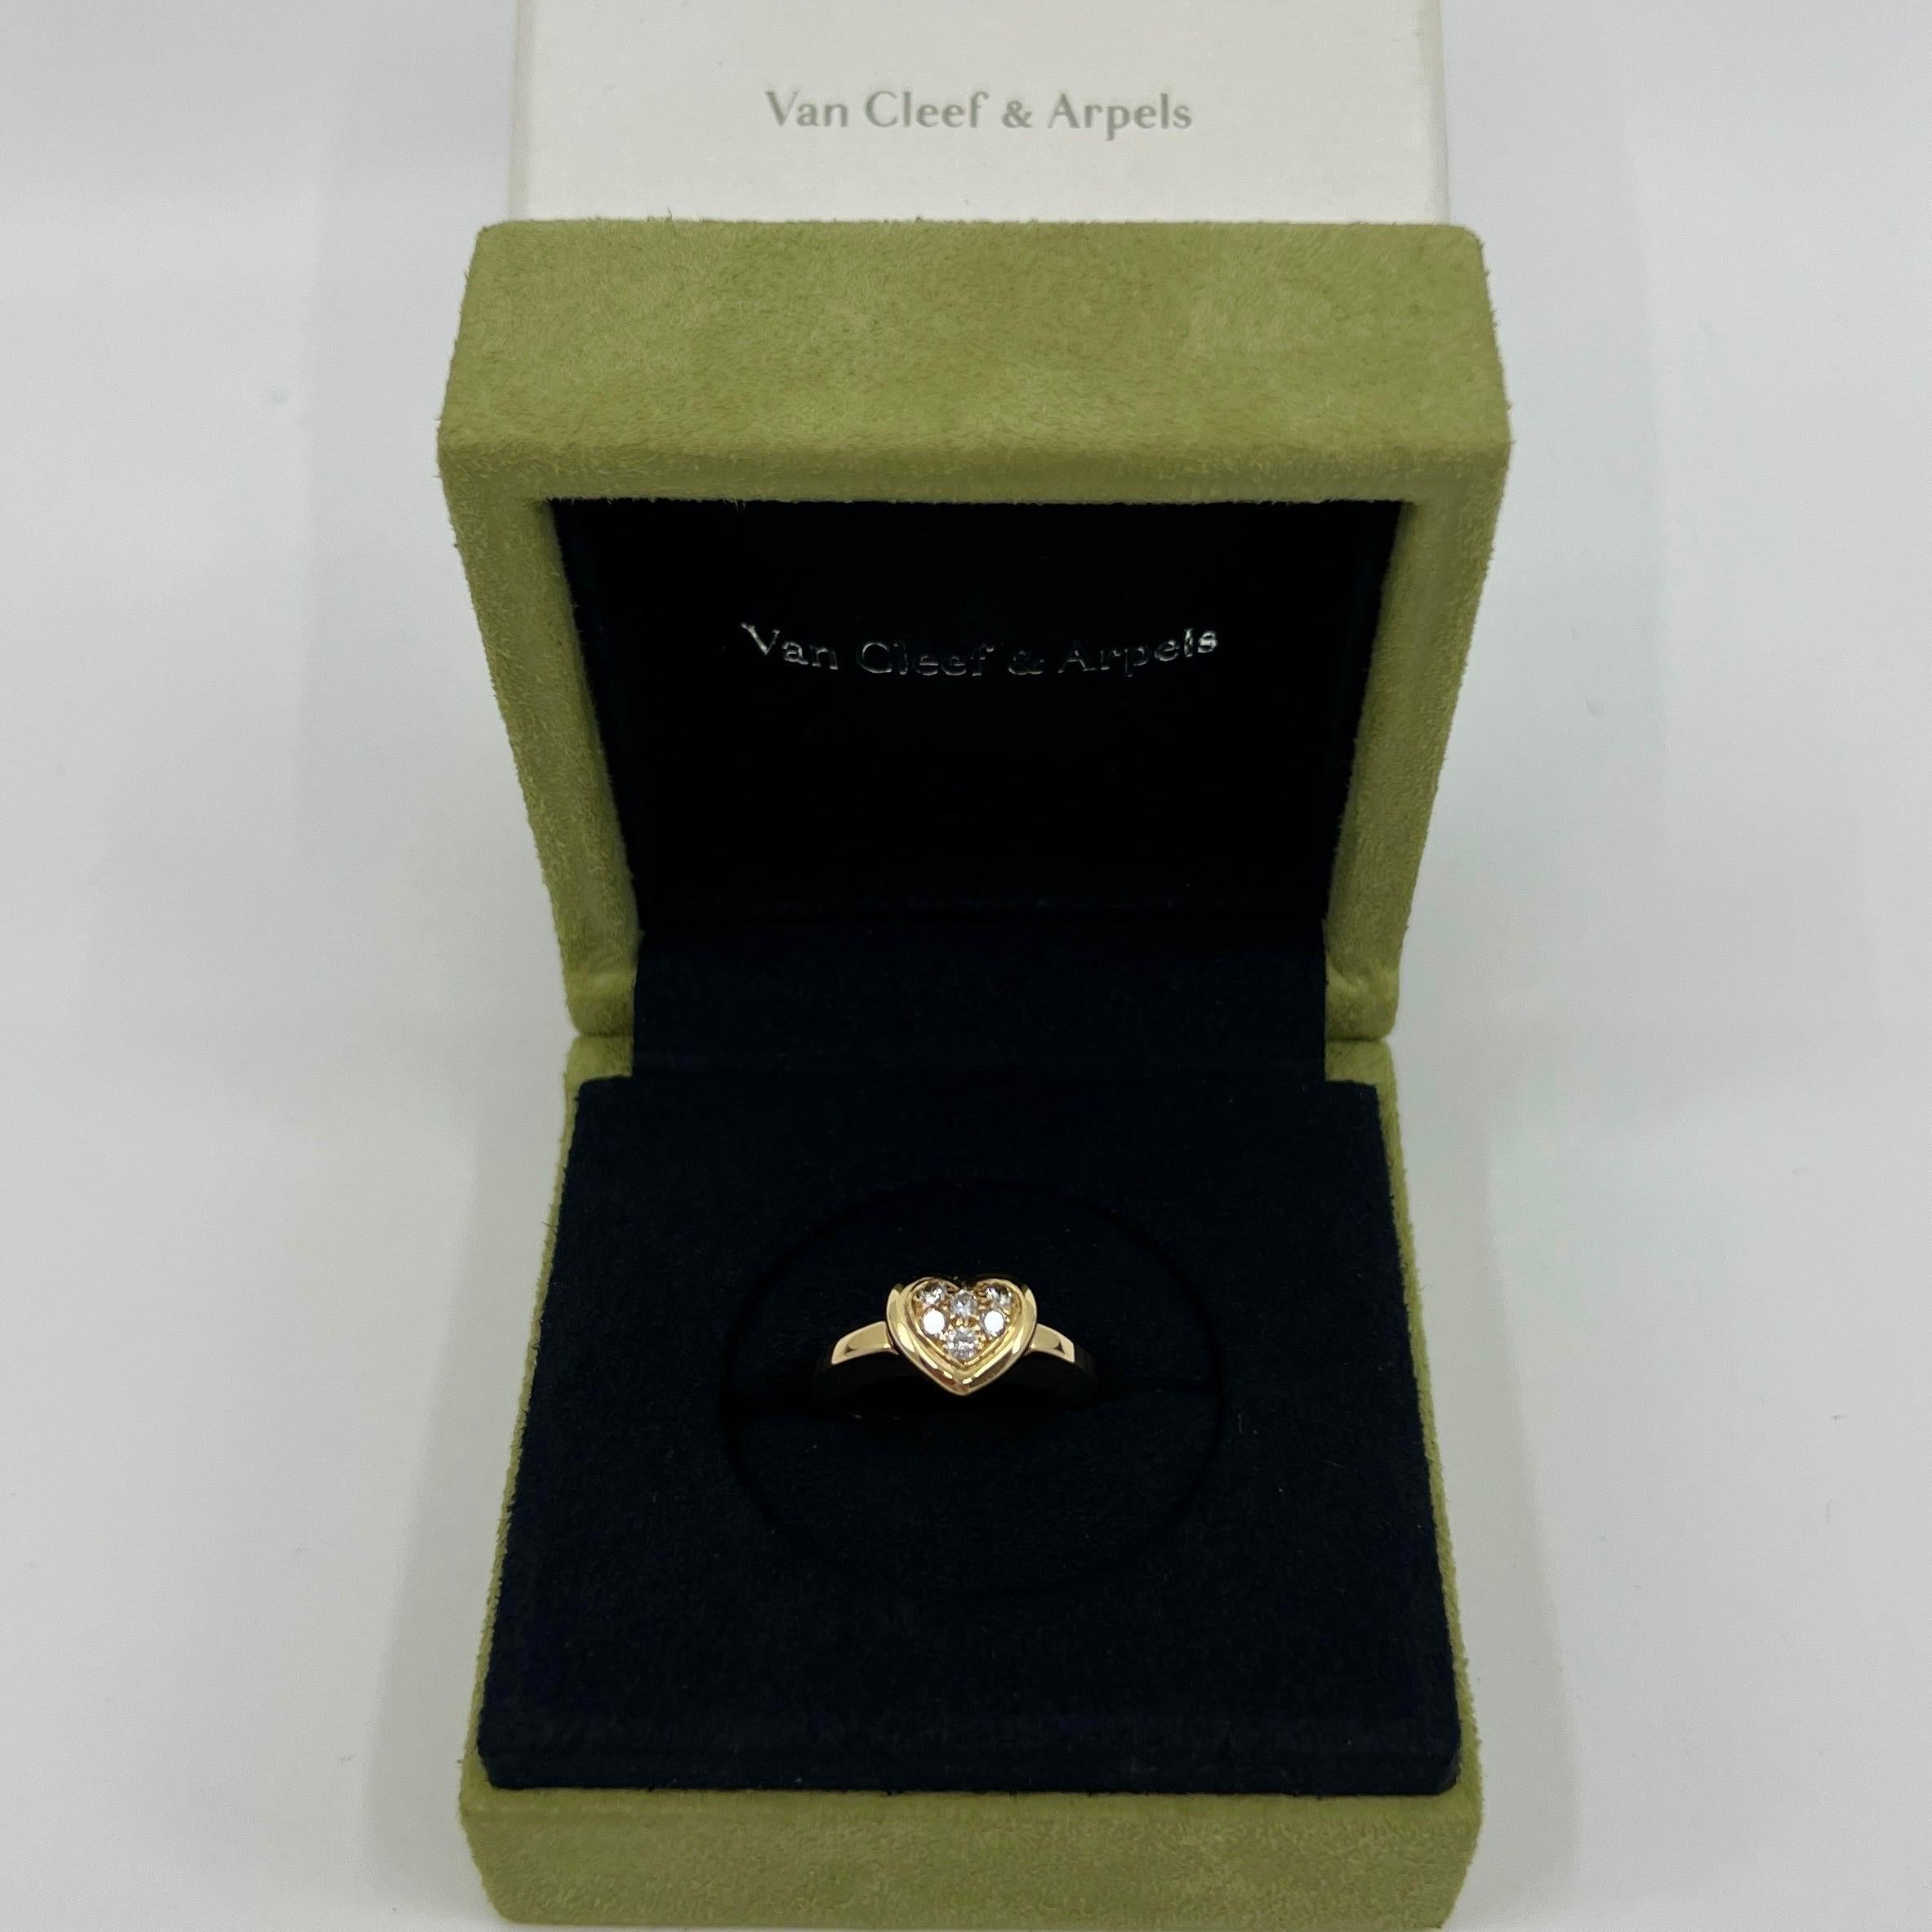 Rare Vintage Van Cleef & Arpels 18k Yellow Gold Diamond Heart Ring And Pendant For Sale 7